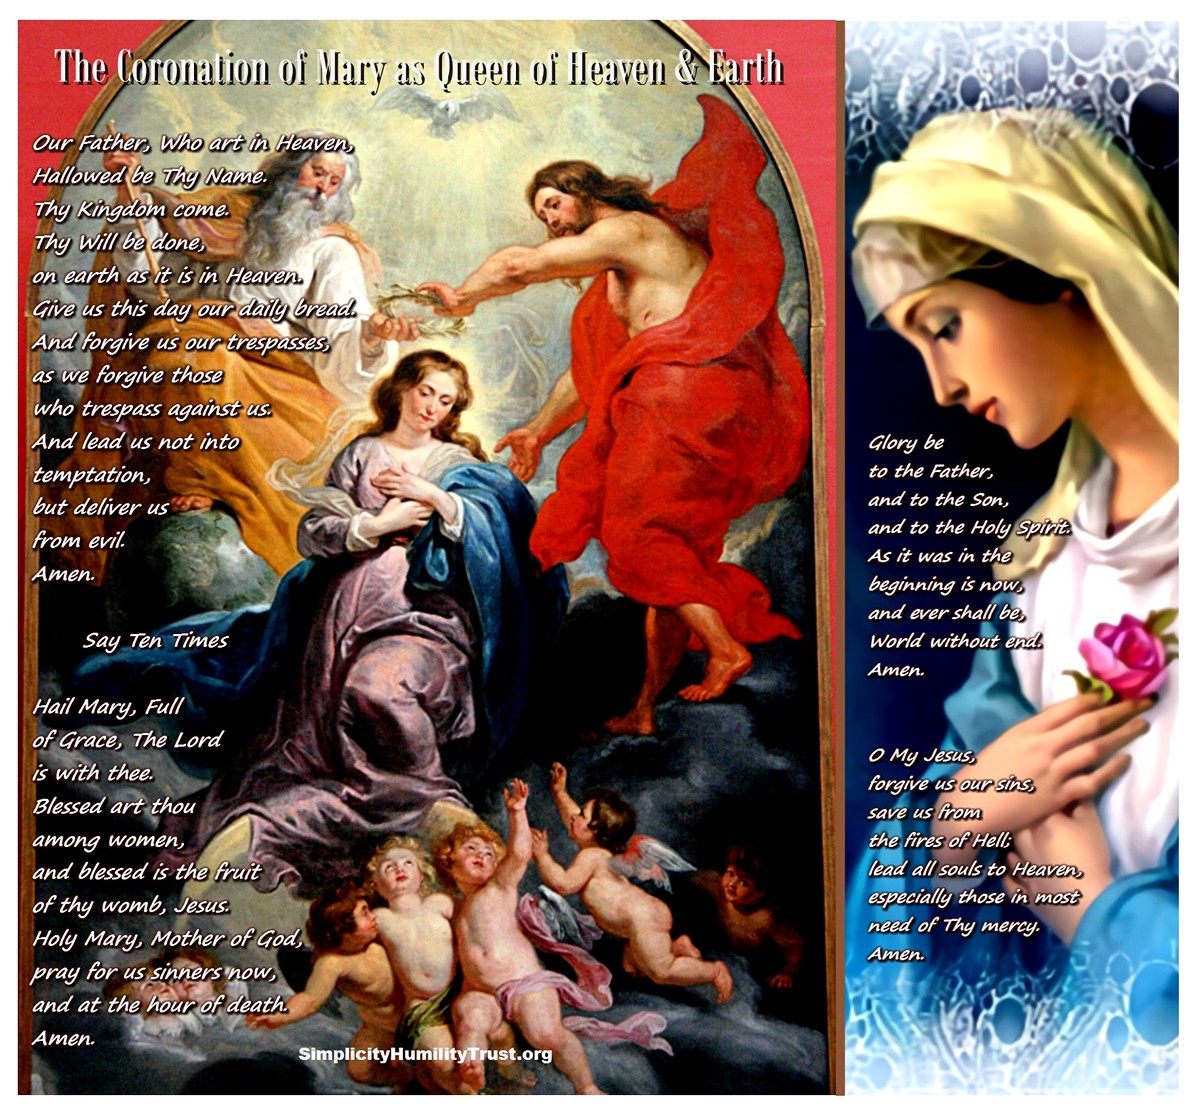 The Coronation of Mary as Queen of Heaven & Earth